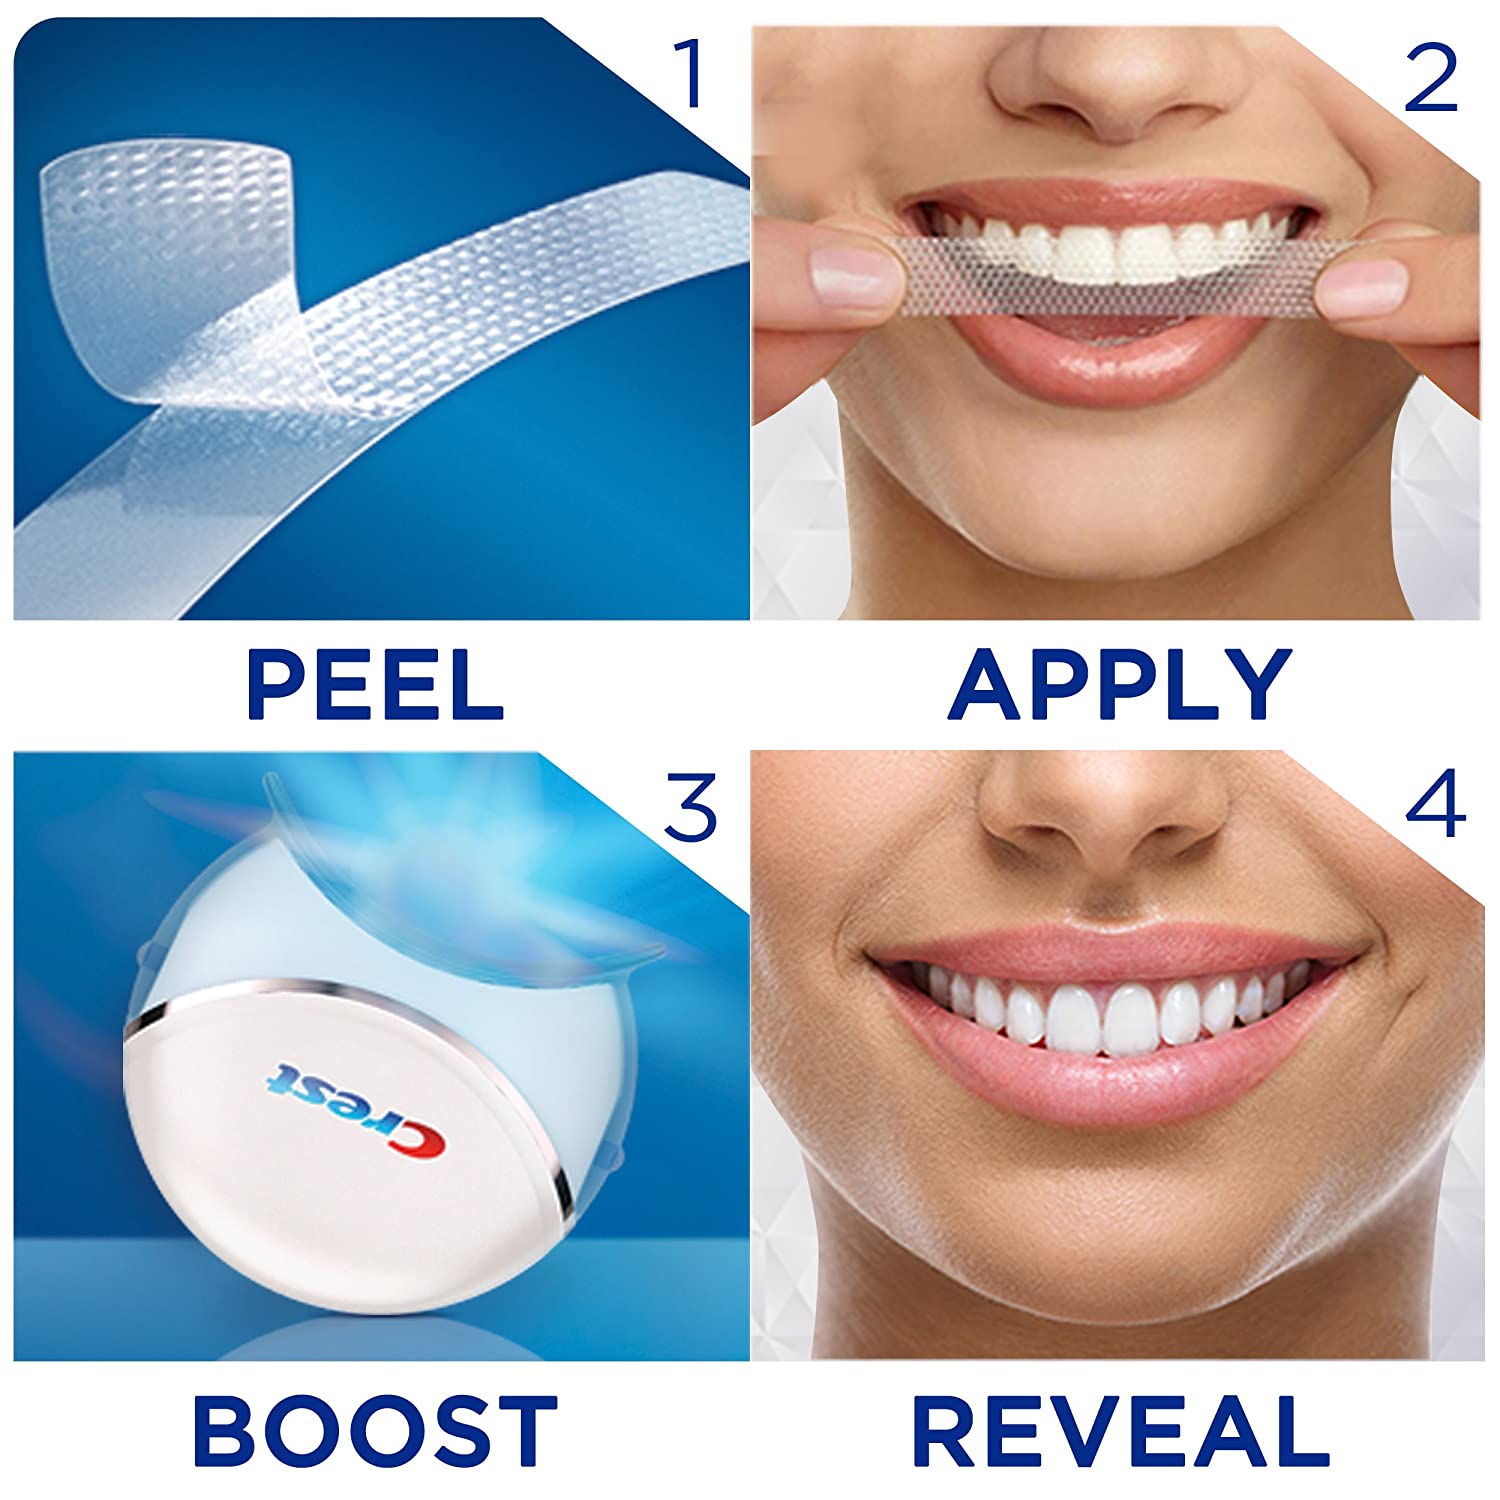 crest whitening strips effective product usage